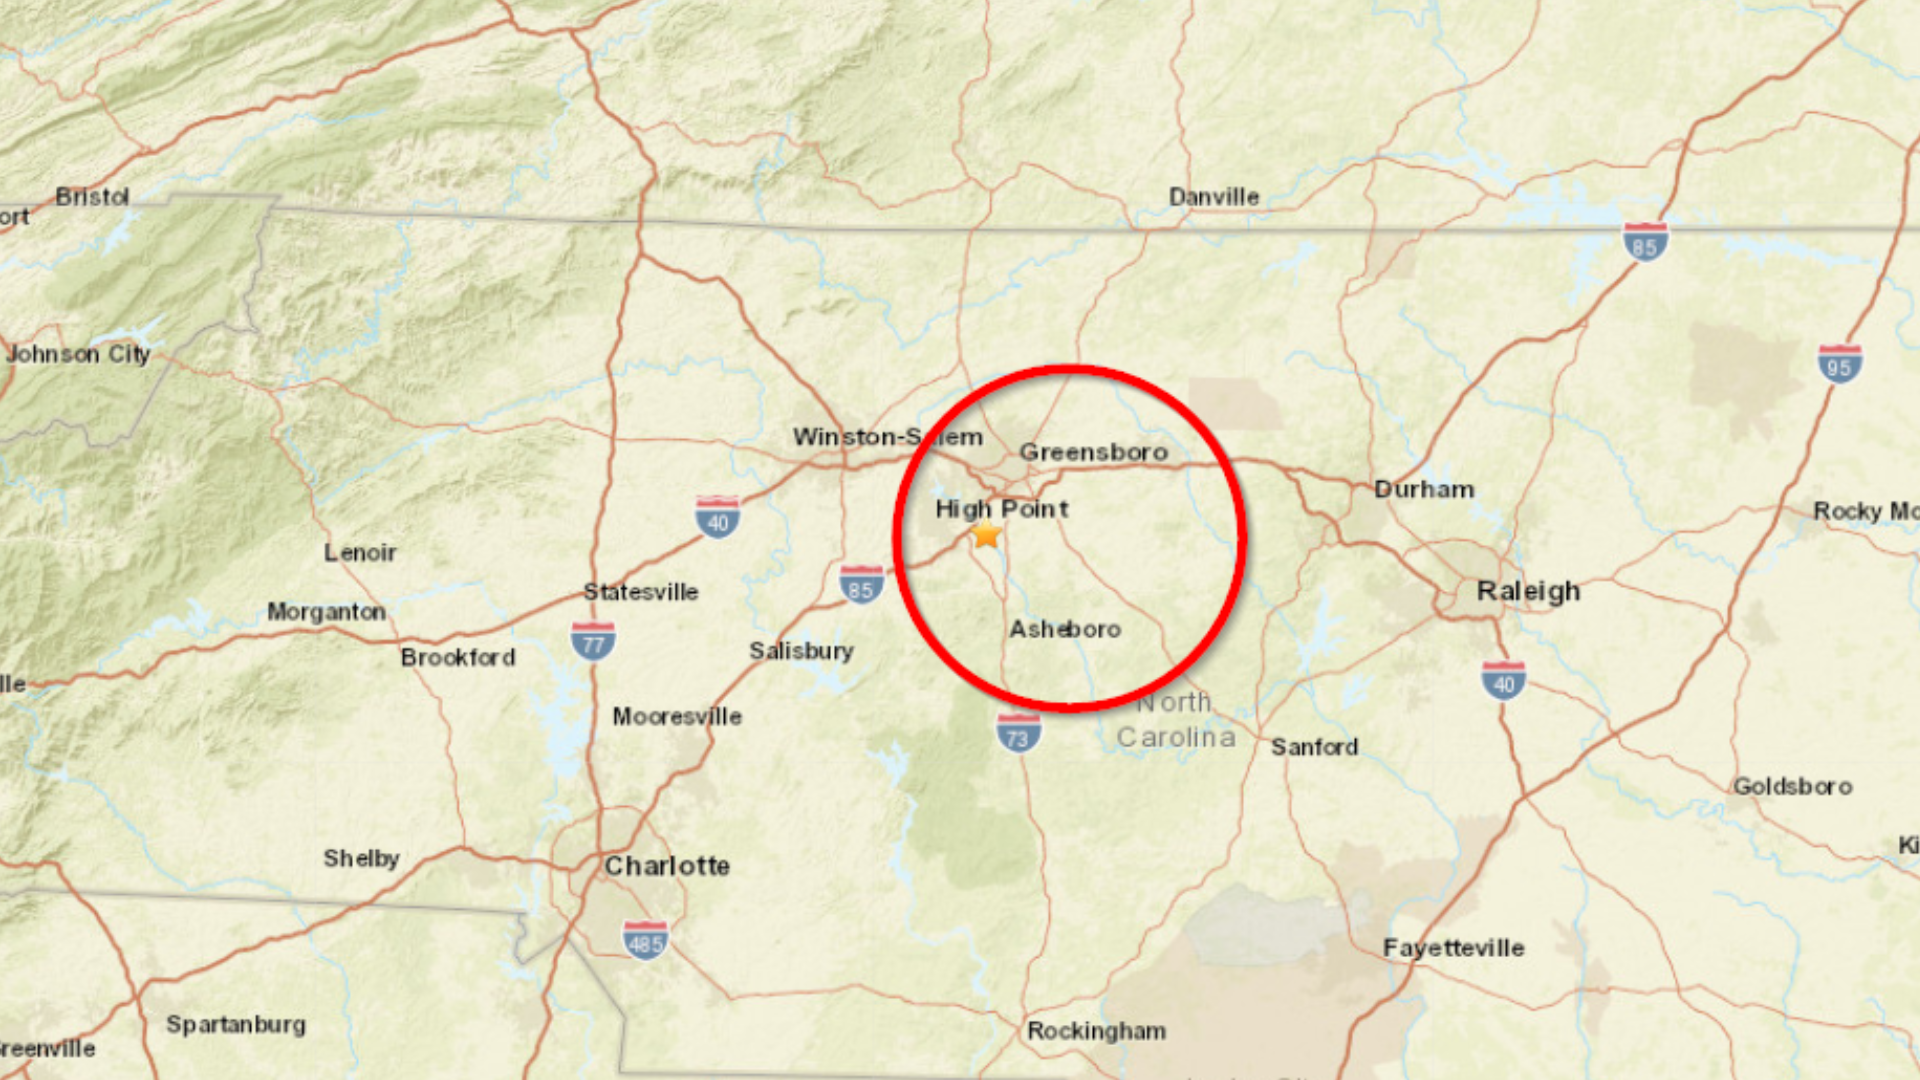 The United States Geological Survey (USGS) has confirmed a 2.6 magnitude earthquake struck near Archdale and was felt in the Guilford and Randolph Counties.